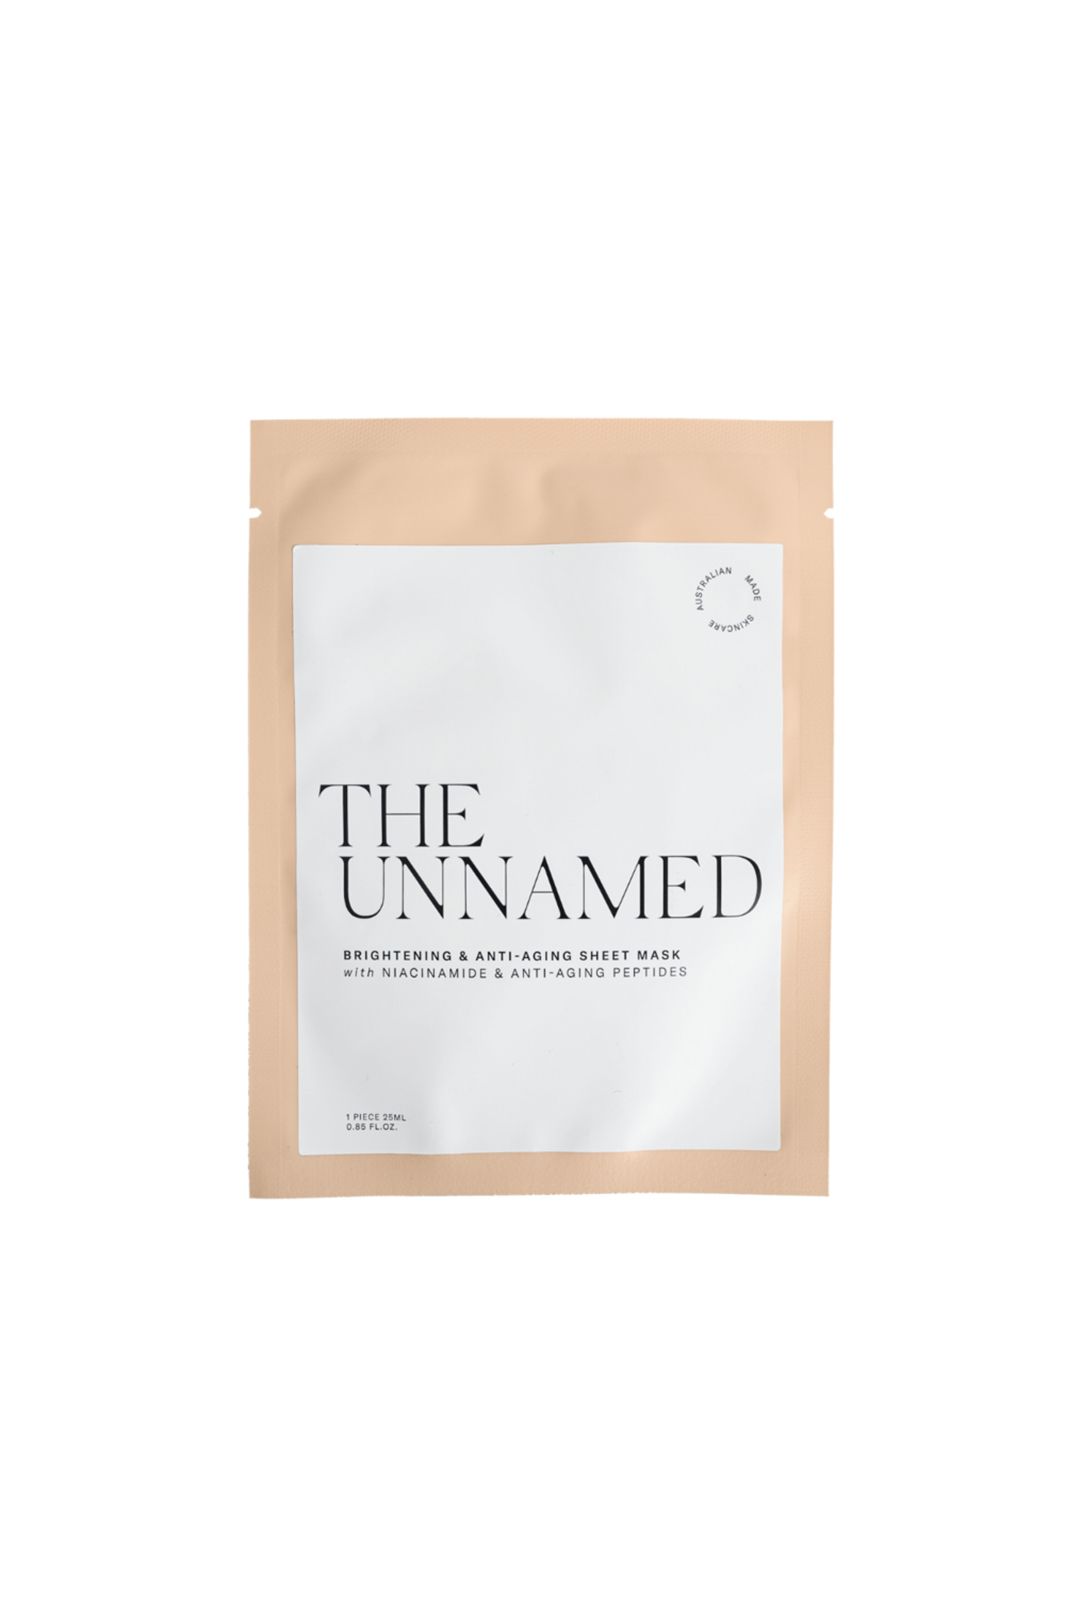 theunnamed-brightening-anti-aging-sheet-mask